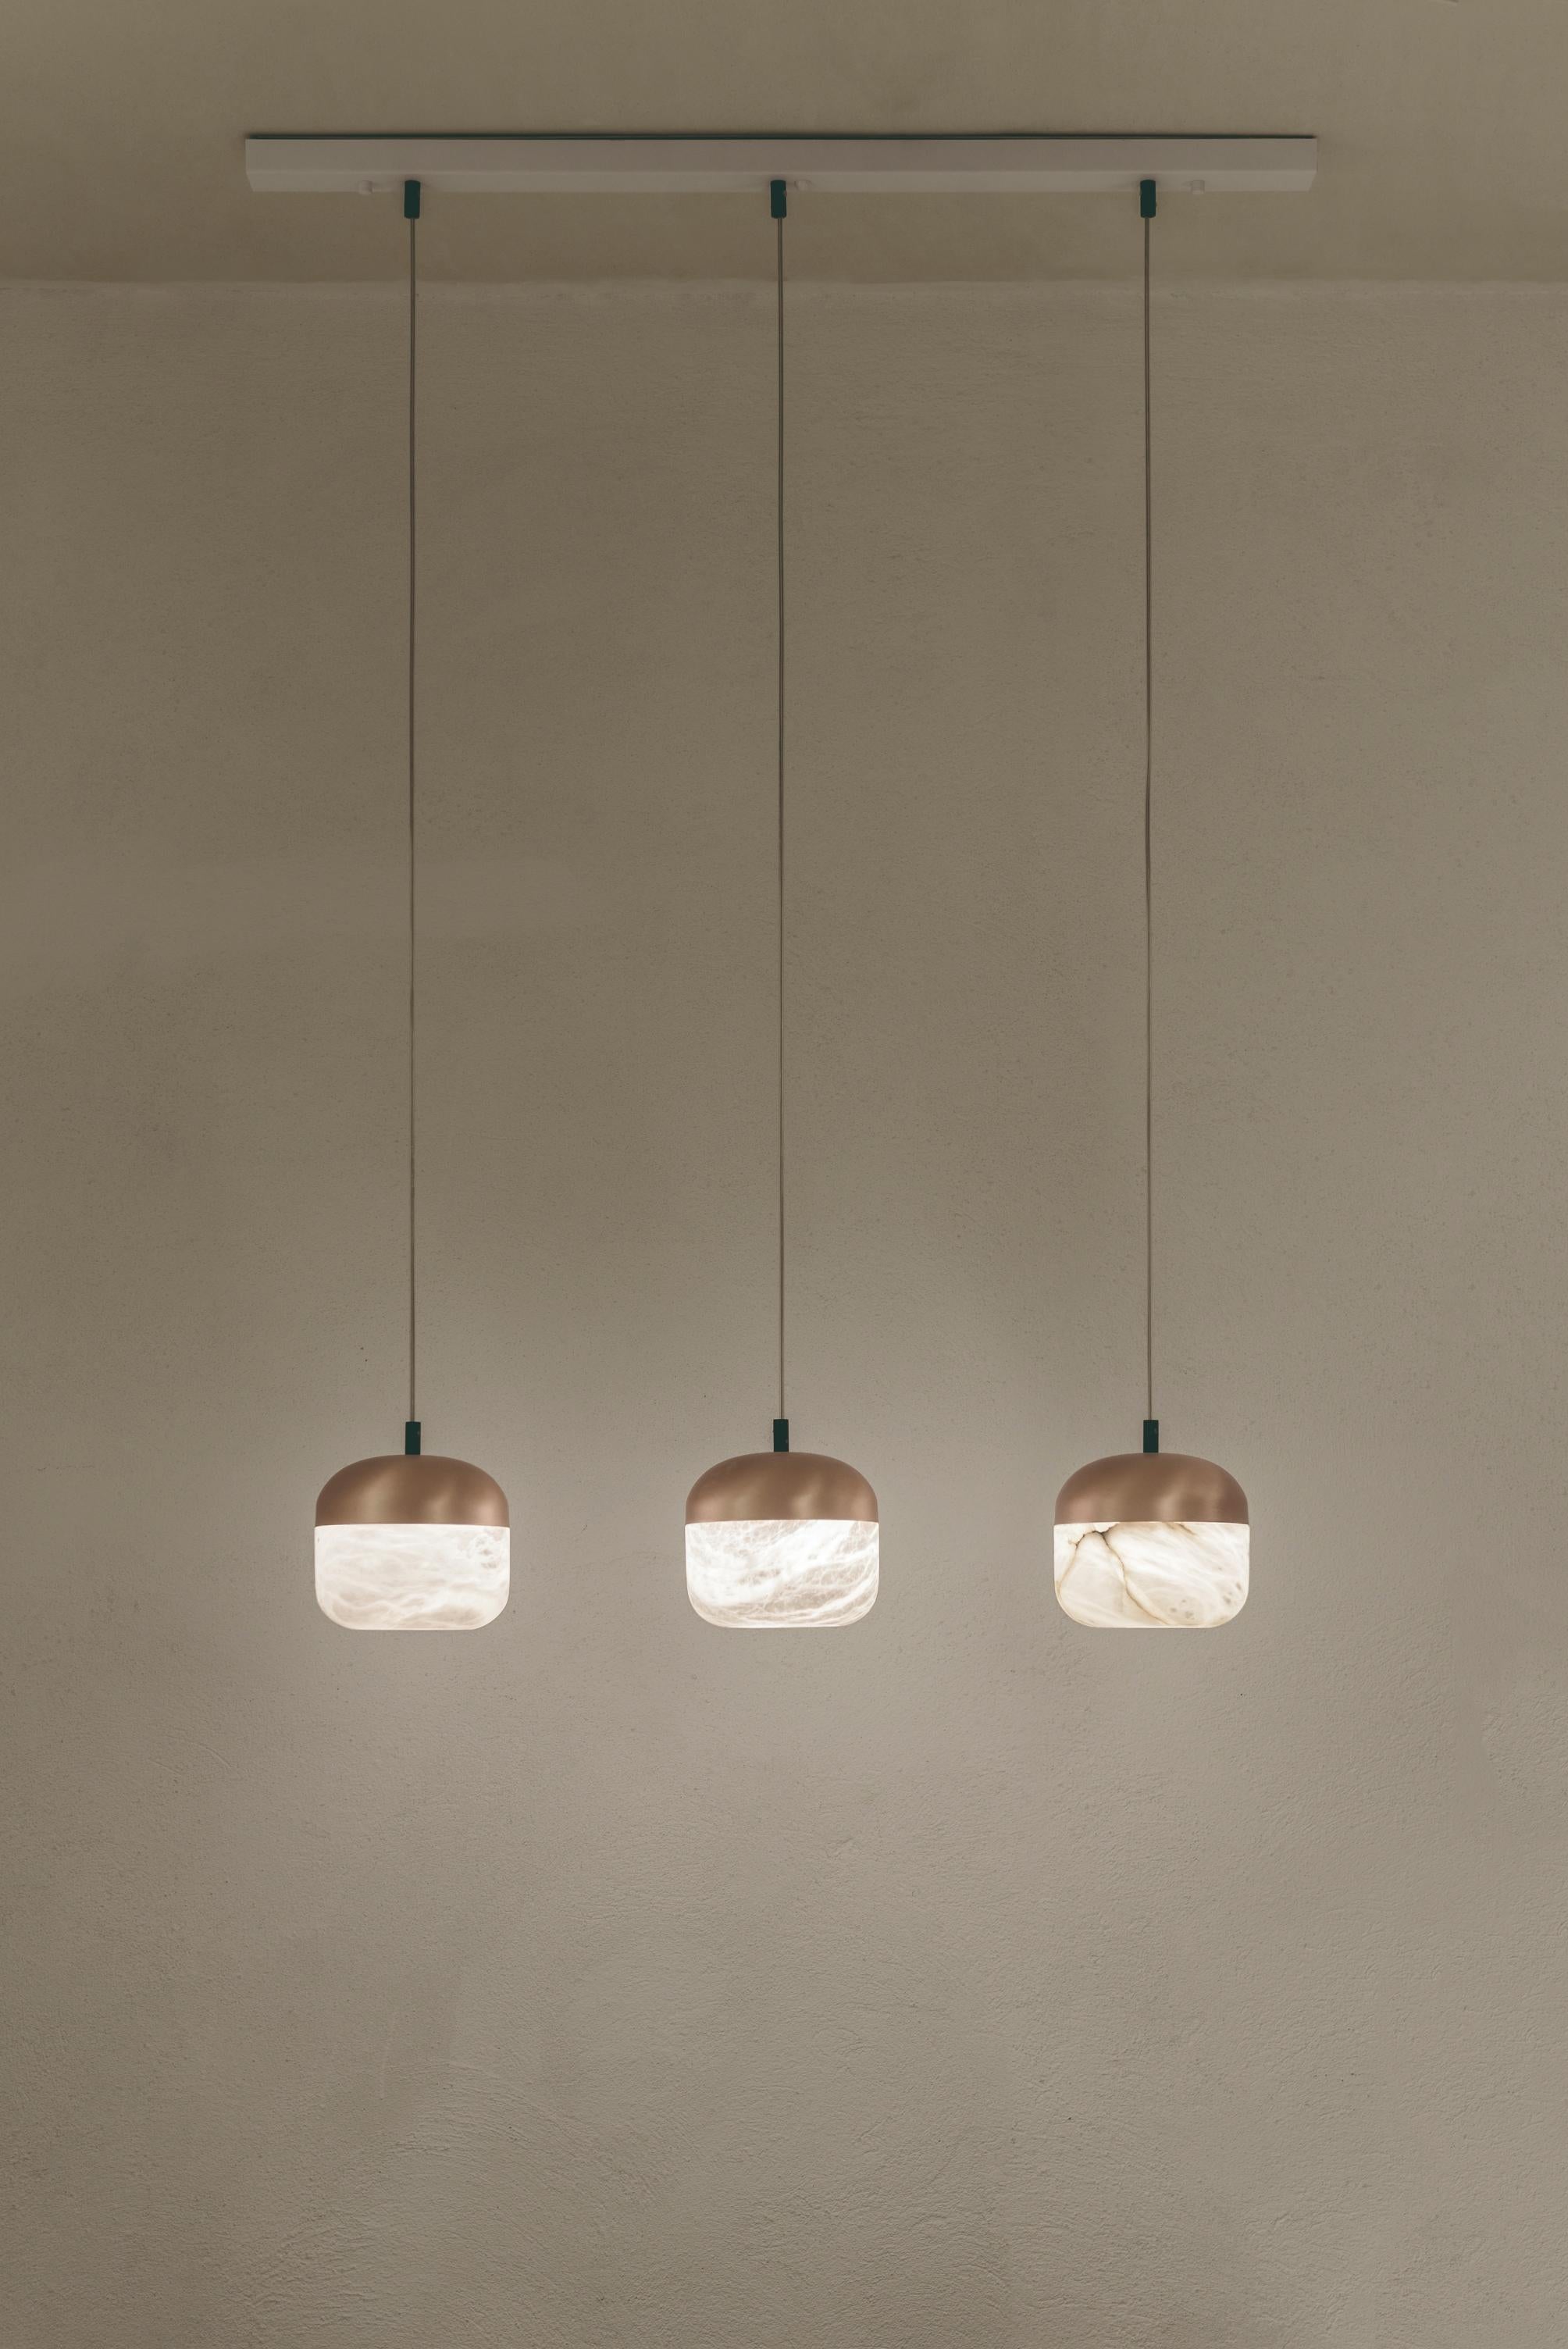 Copper 3 Pendant Lamp by United Alabaster
Dimensions: W 100 x D 18 x H 200 cm
Materials: Alabaster, Copper (Satin Copper Finish)
Also Available: Black Nickel, Satin Gold finishes.

All our lamps can be wired according to each country. If sold to the